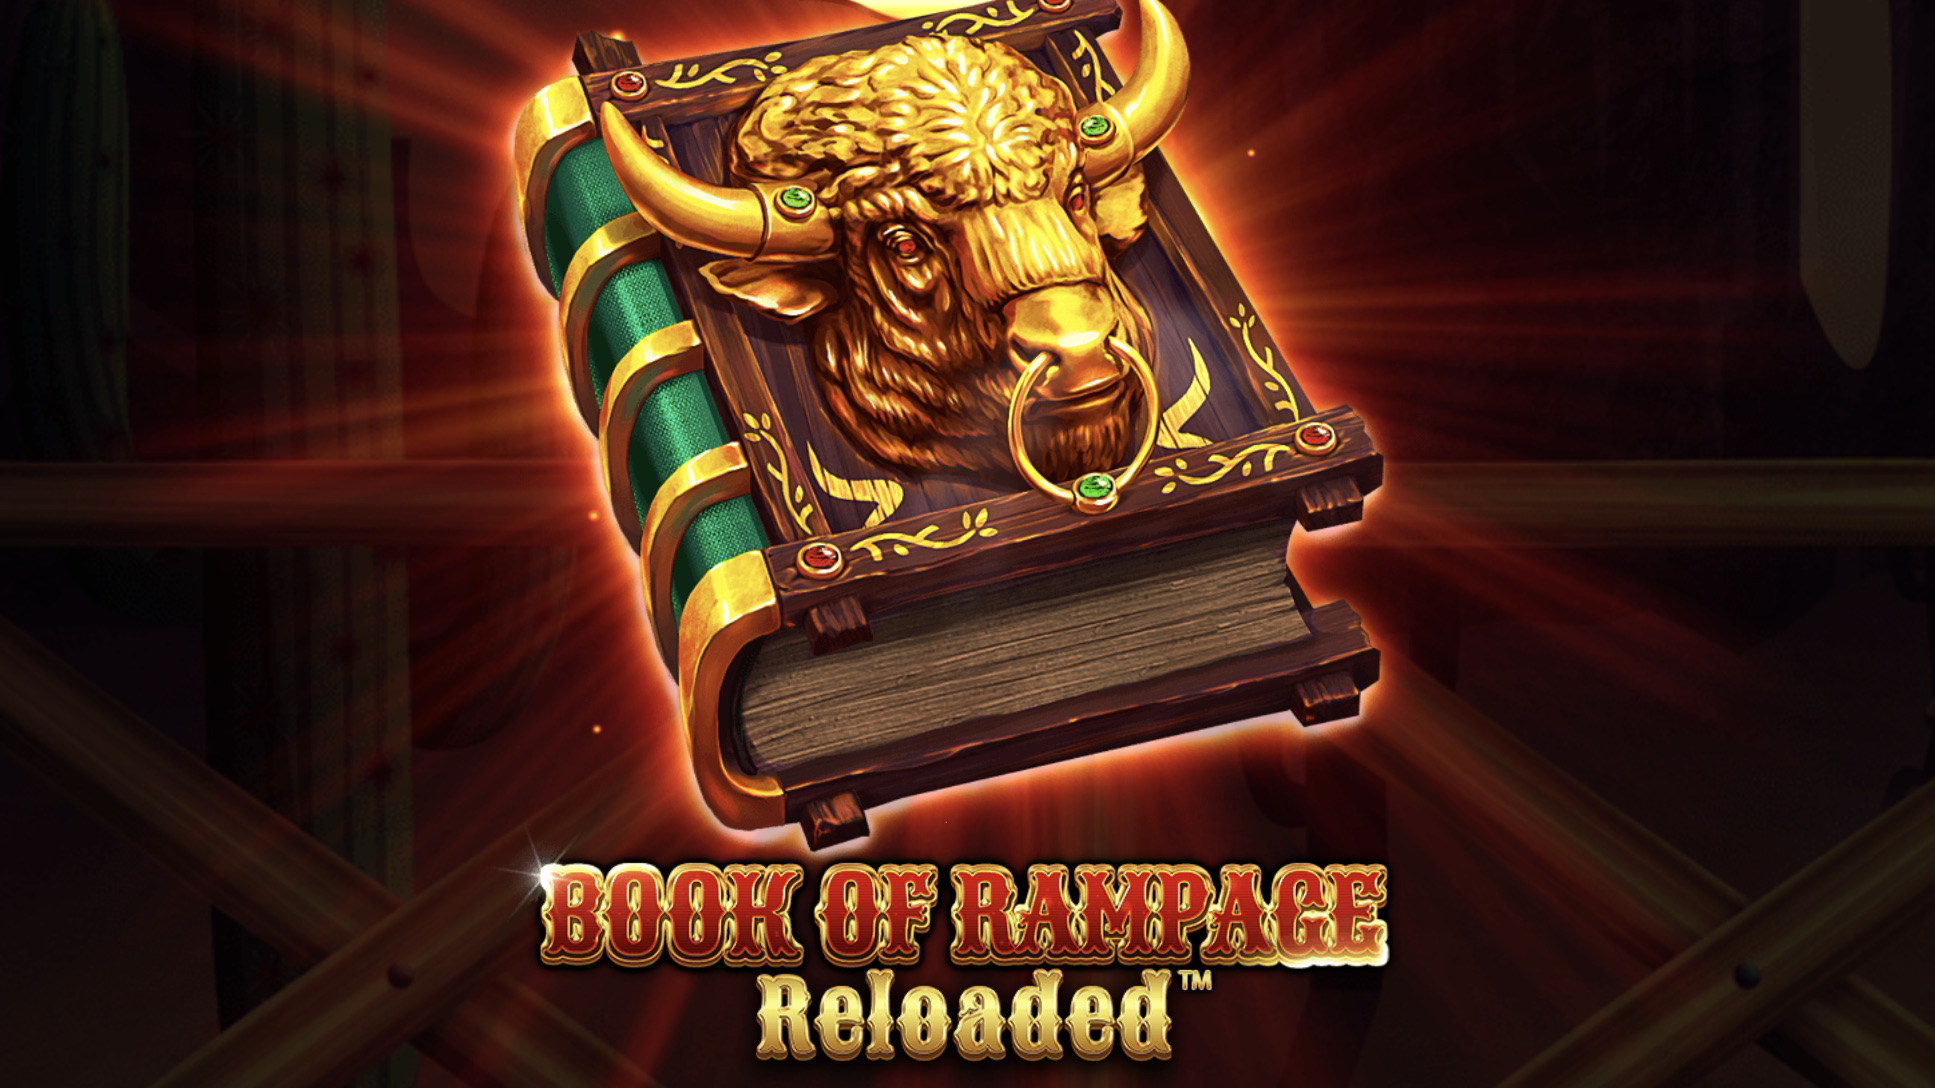 Book of Rampage Reloaded is a 5x3, five-payline video slot that incorporates a maximum win potential of up to x10,000 the bet.